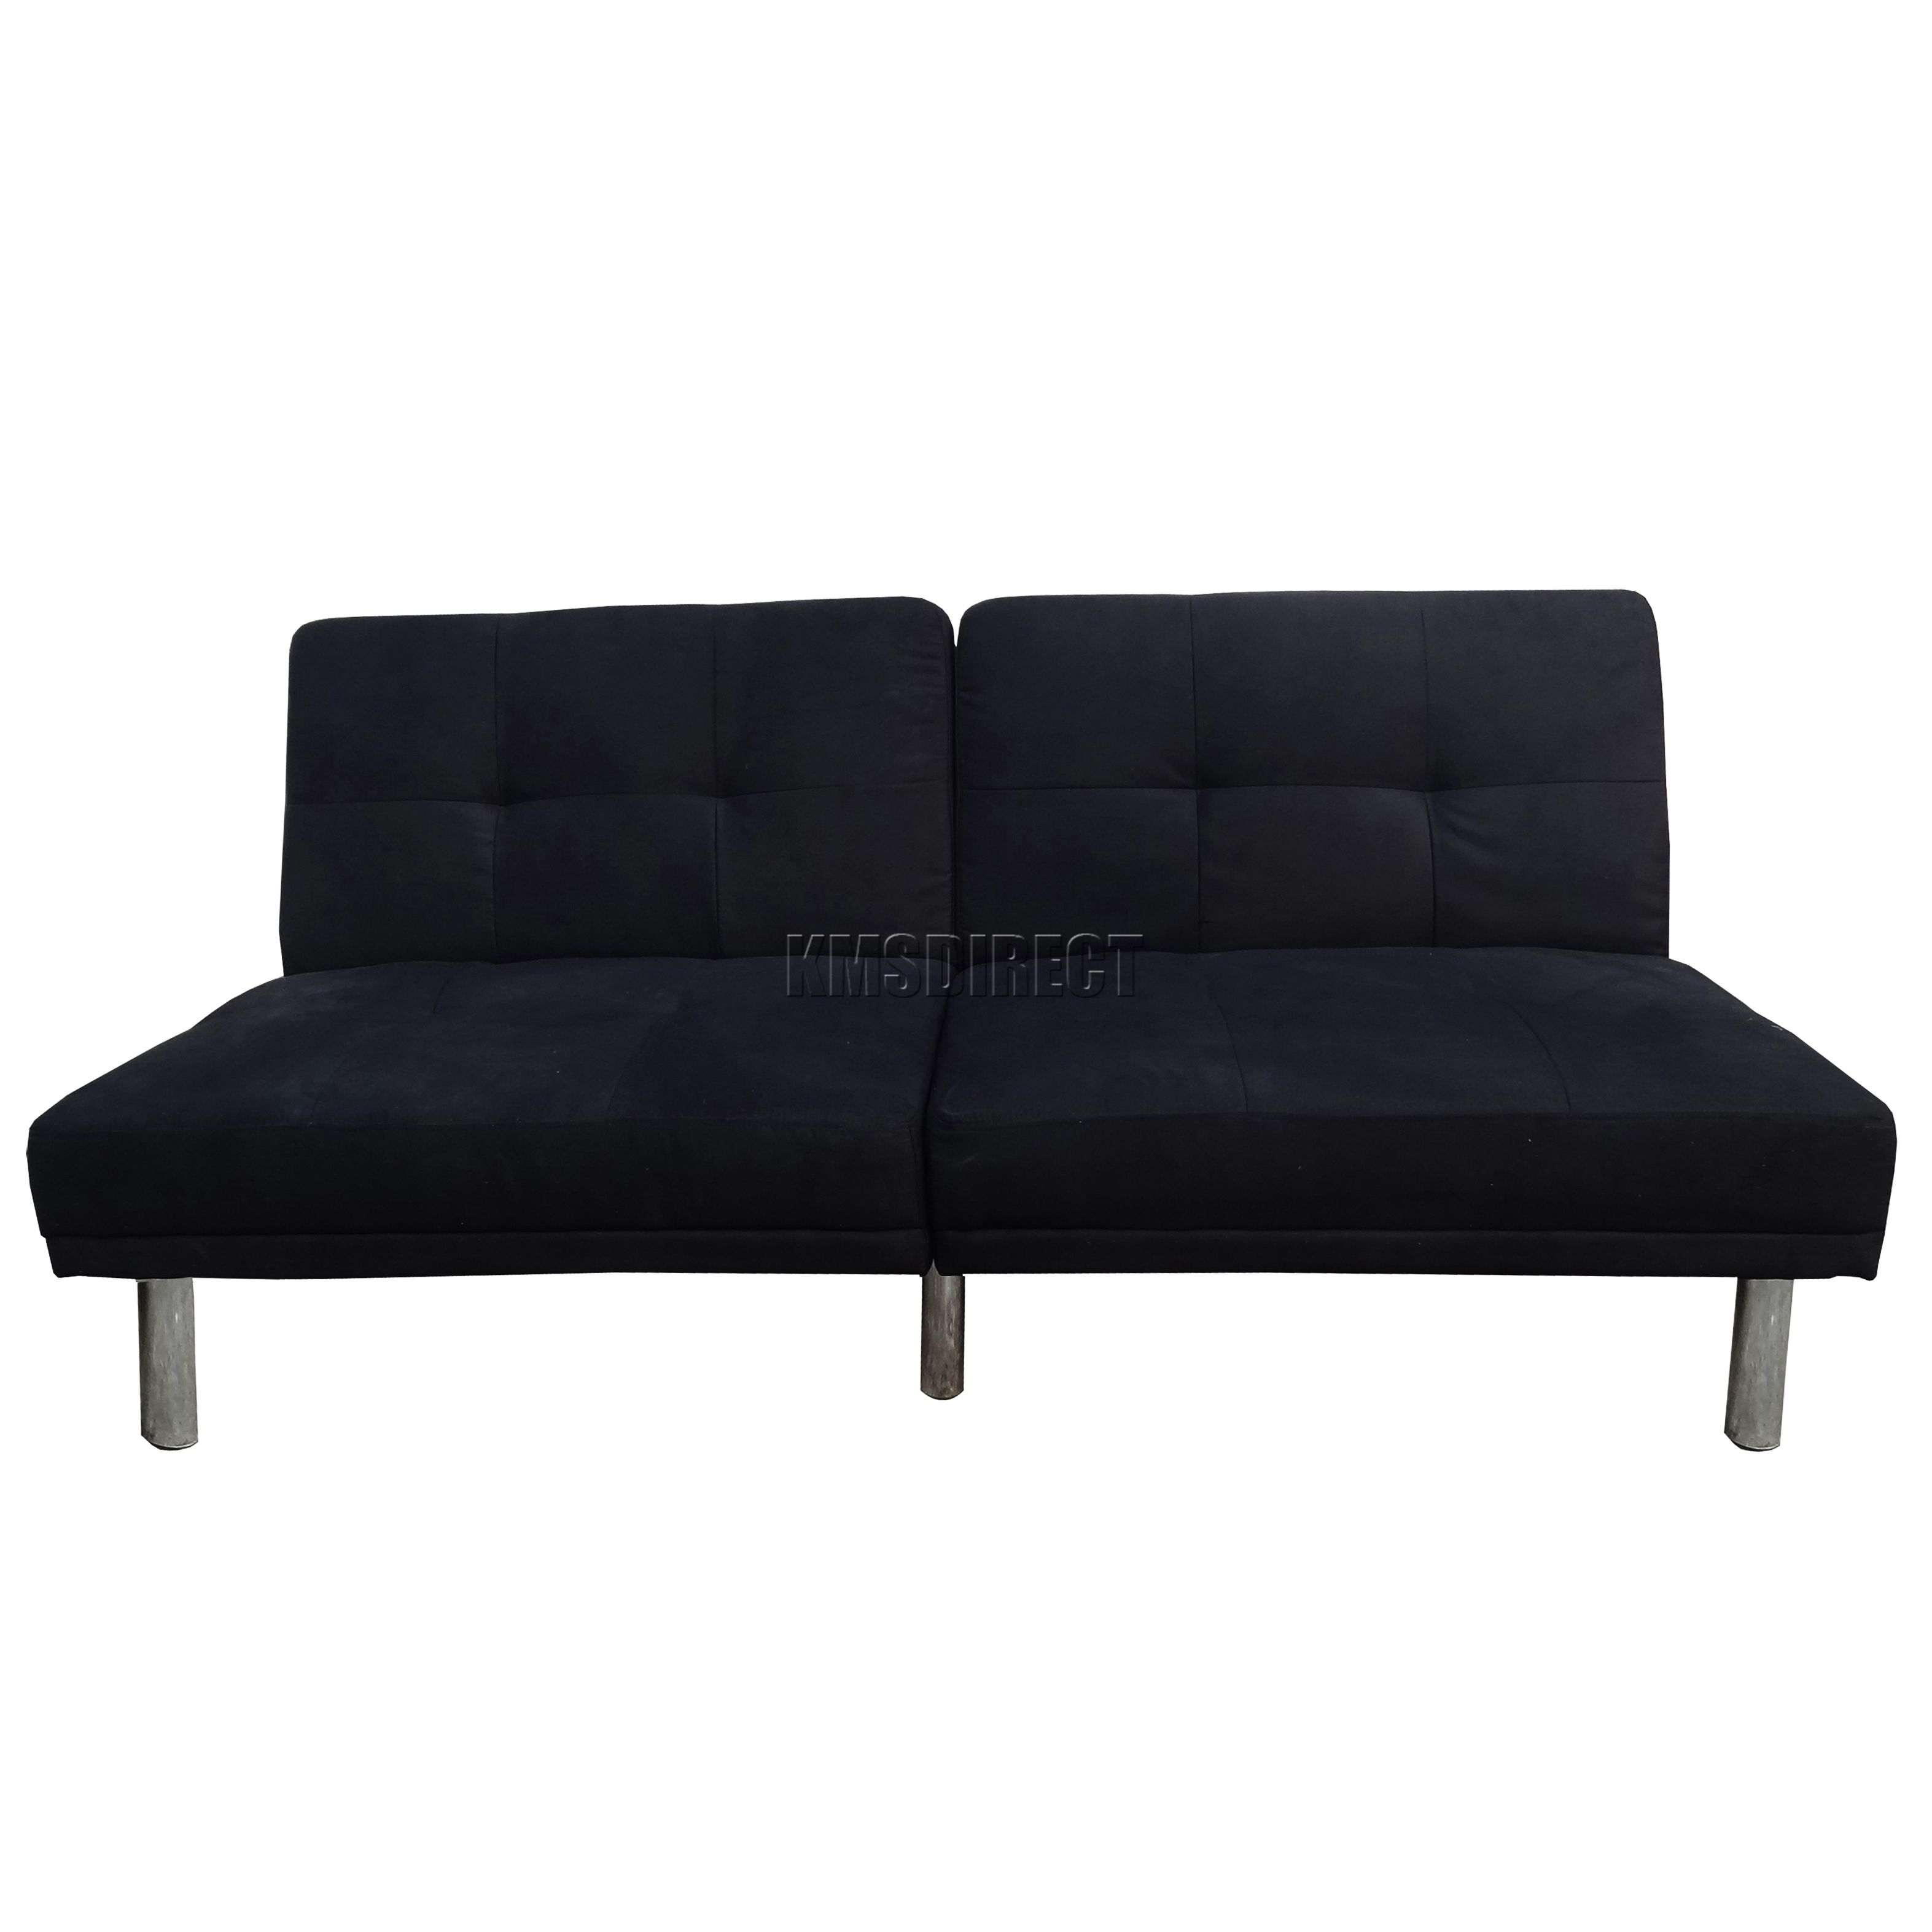 Foxhunter Fabric Faux Suede Sofa Bed Recliner 2 Seater Living Room Pertaining To Faux Suede Sofas (View 4 of 10)